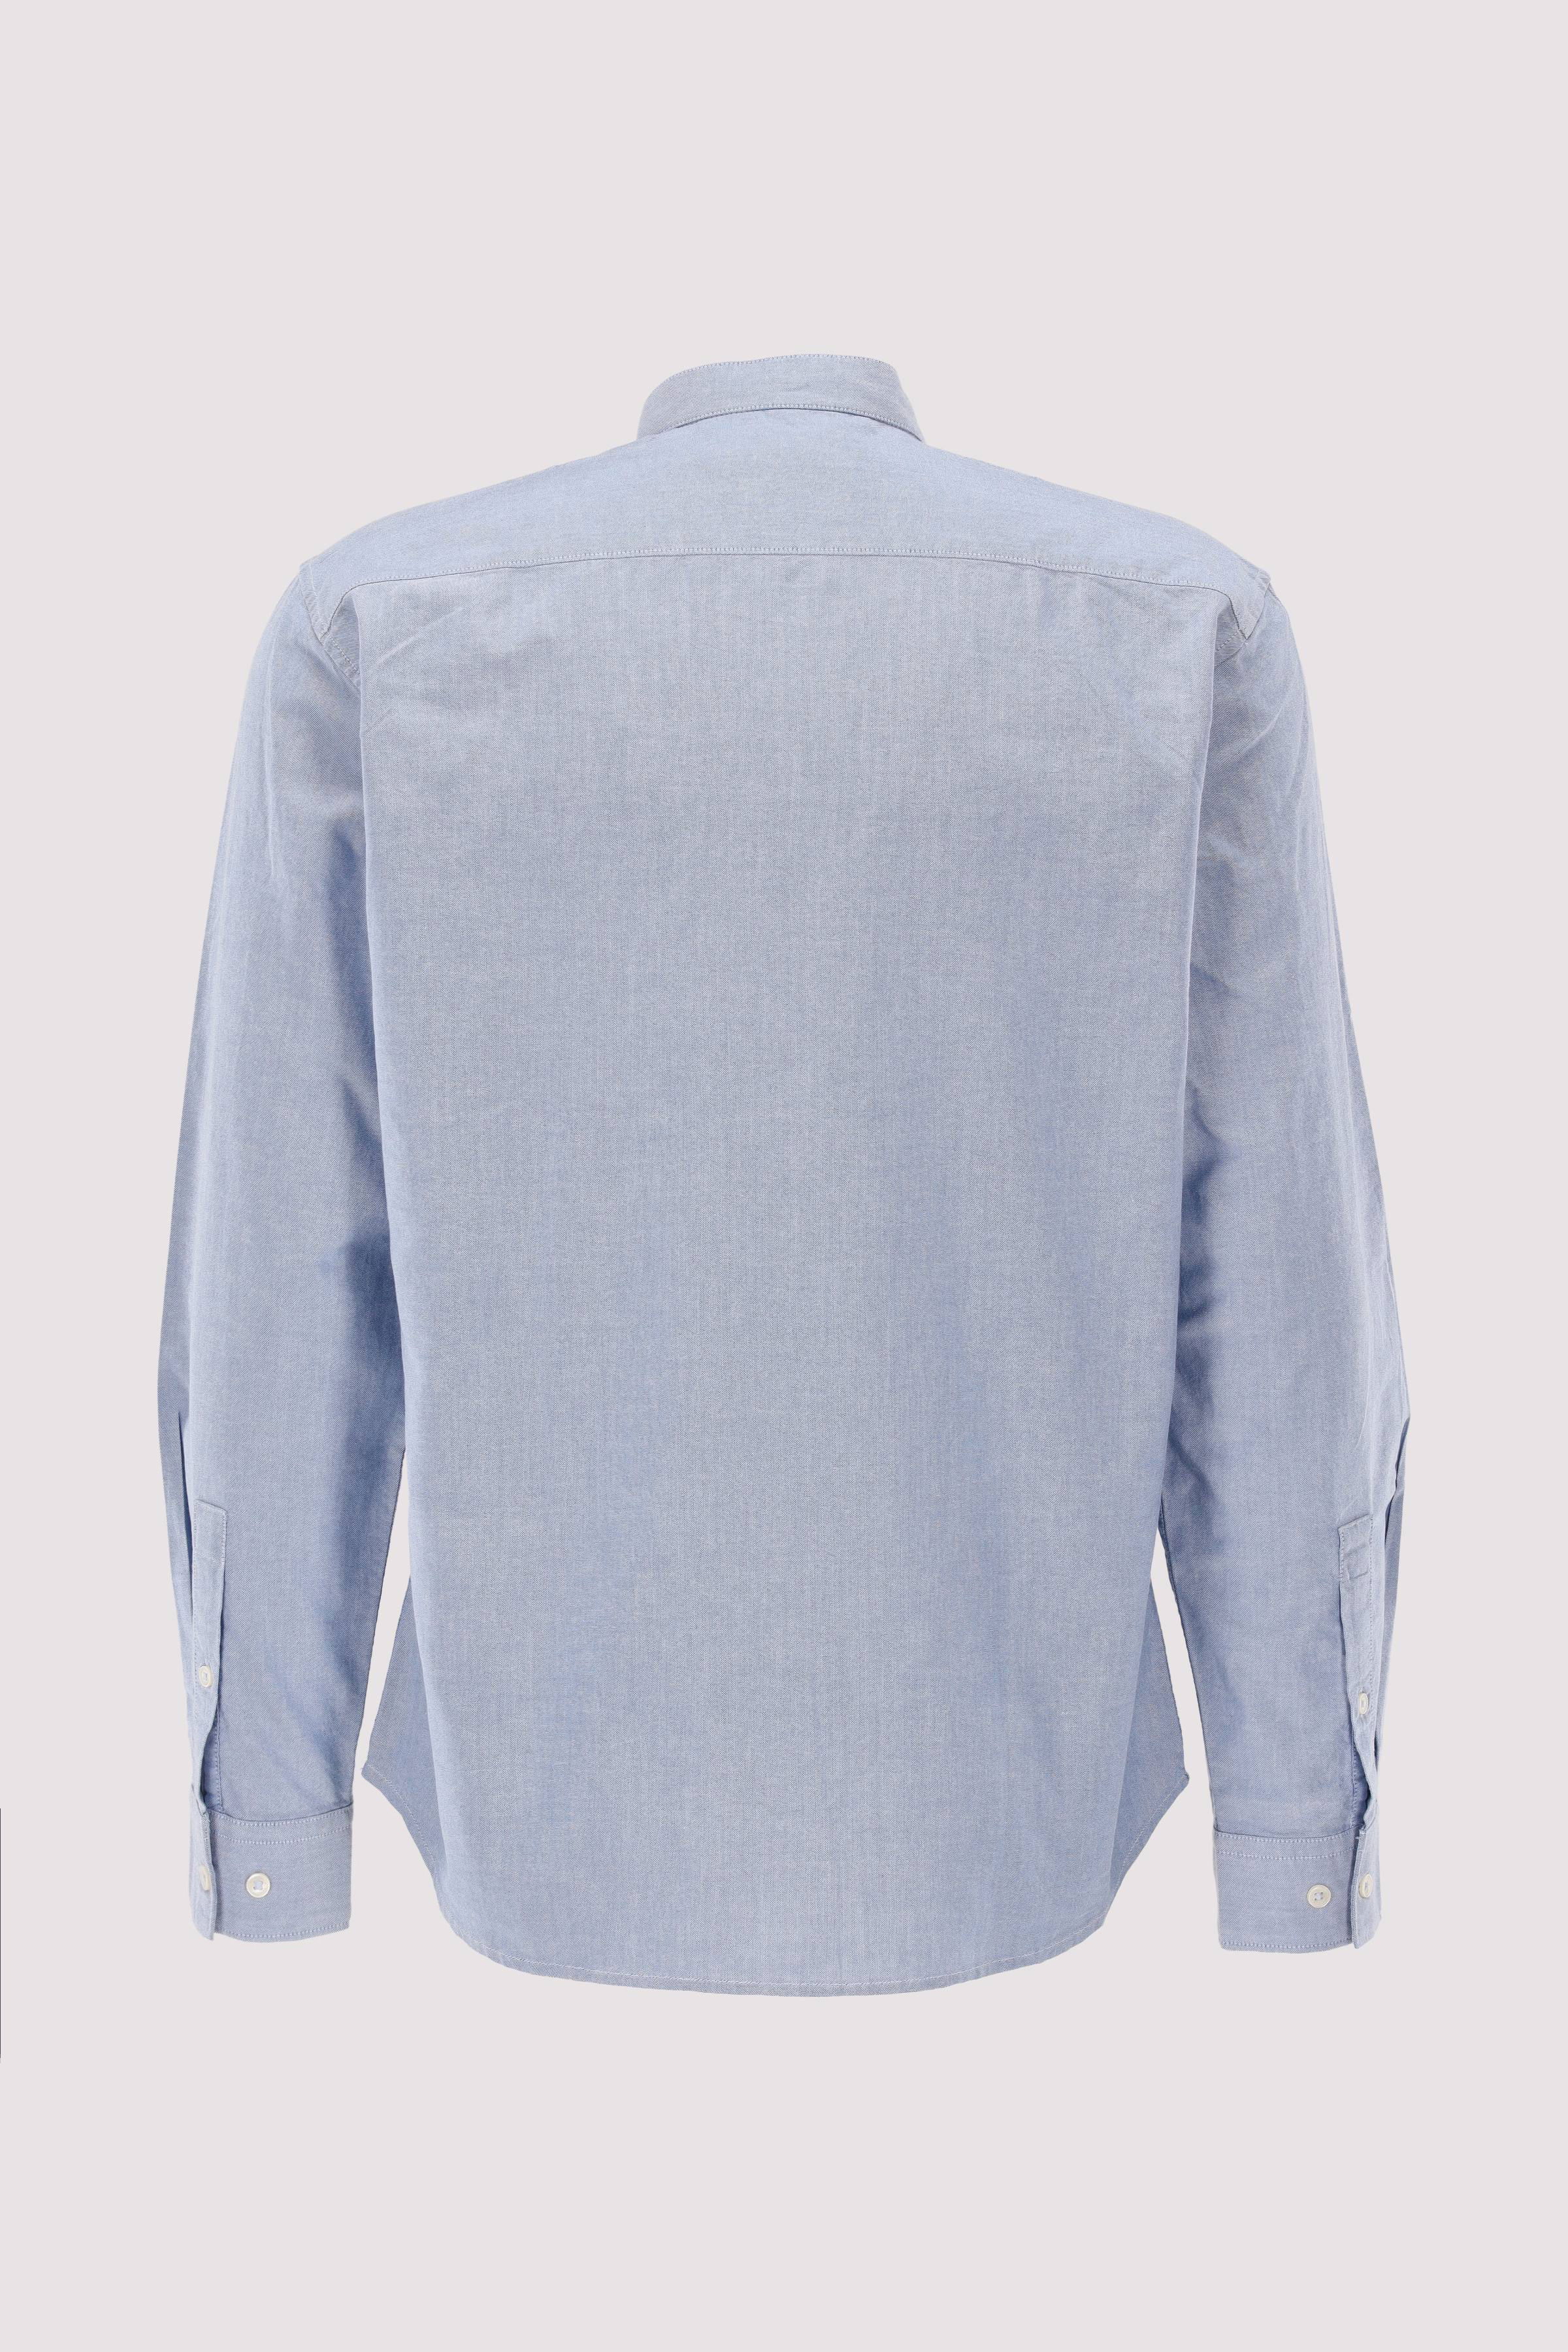 Stand up collar, long sleeves,